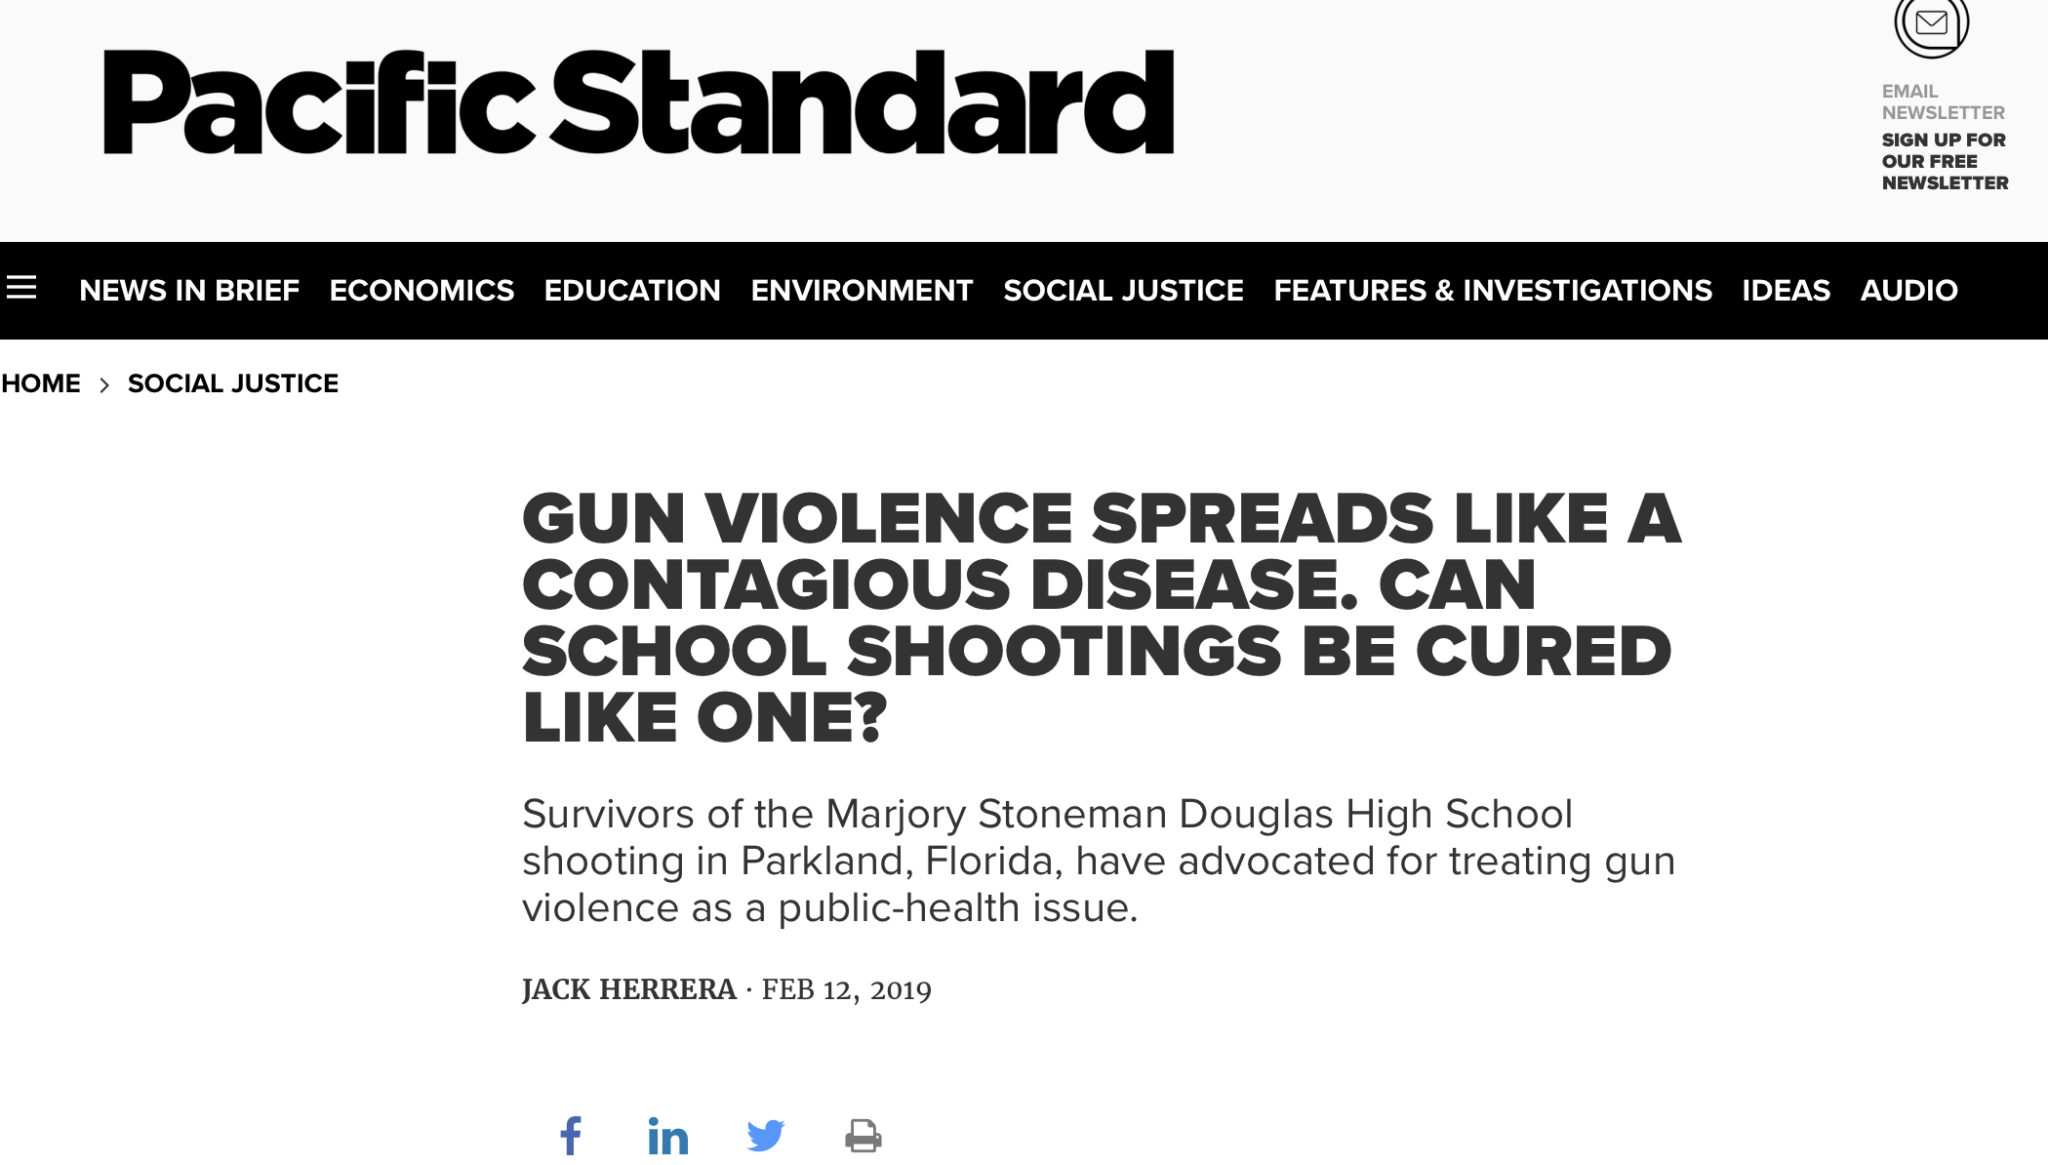 Pacific Standard: Gun Violence Spreads Like a Contagious Disease. Can School Shootings Be Cured Like One?